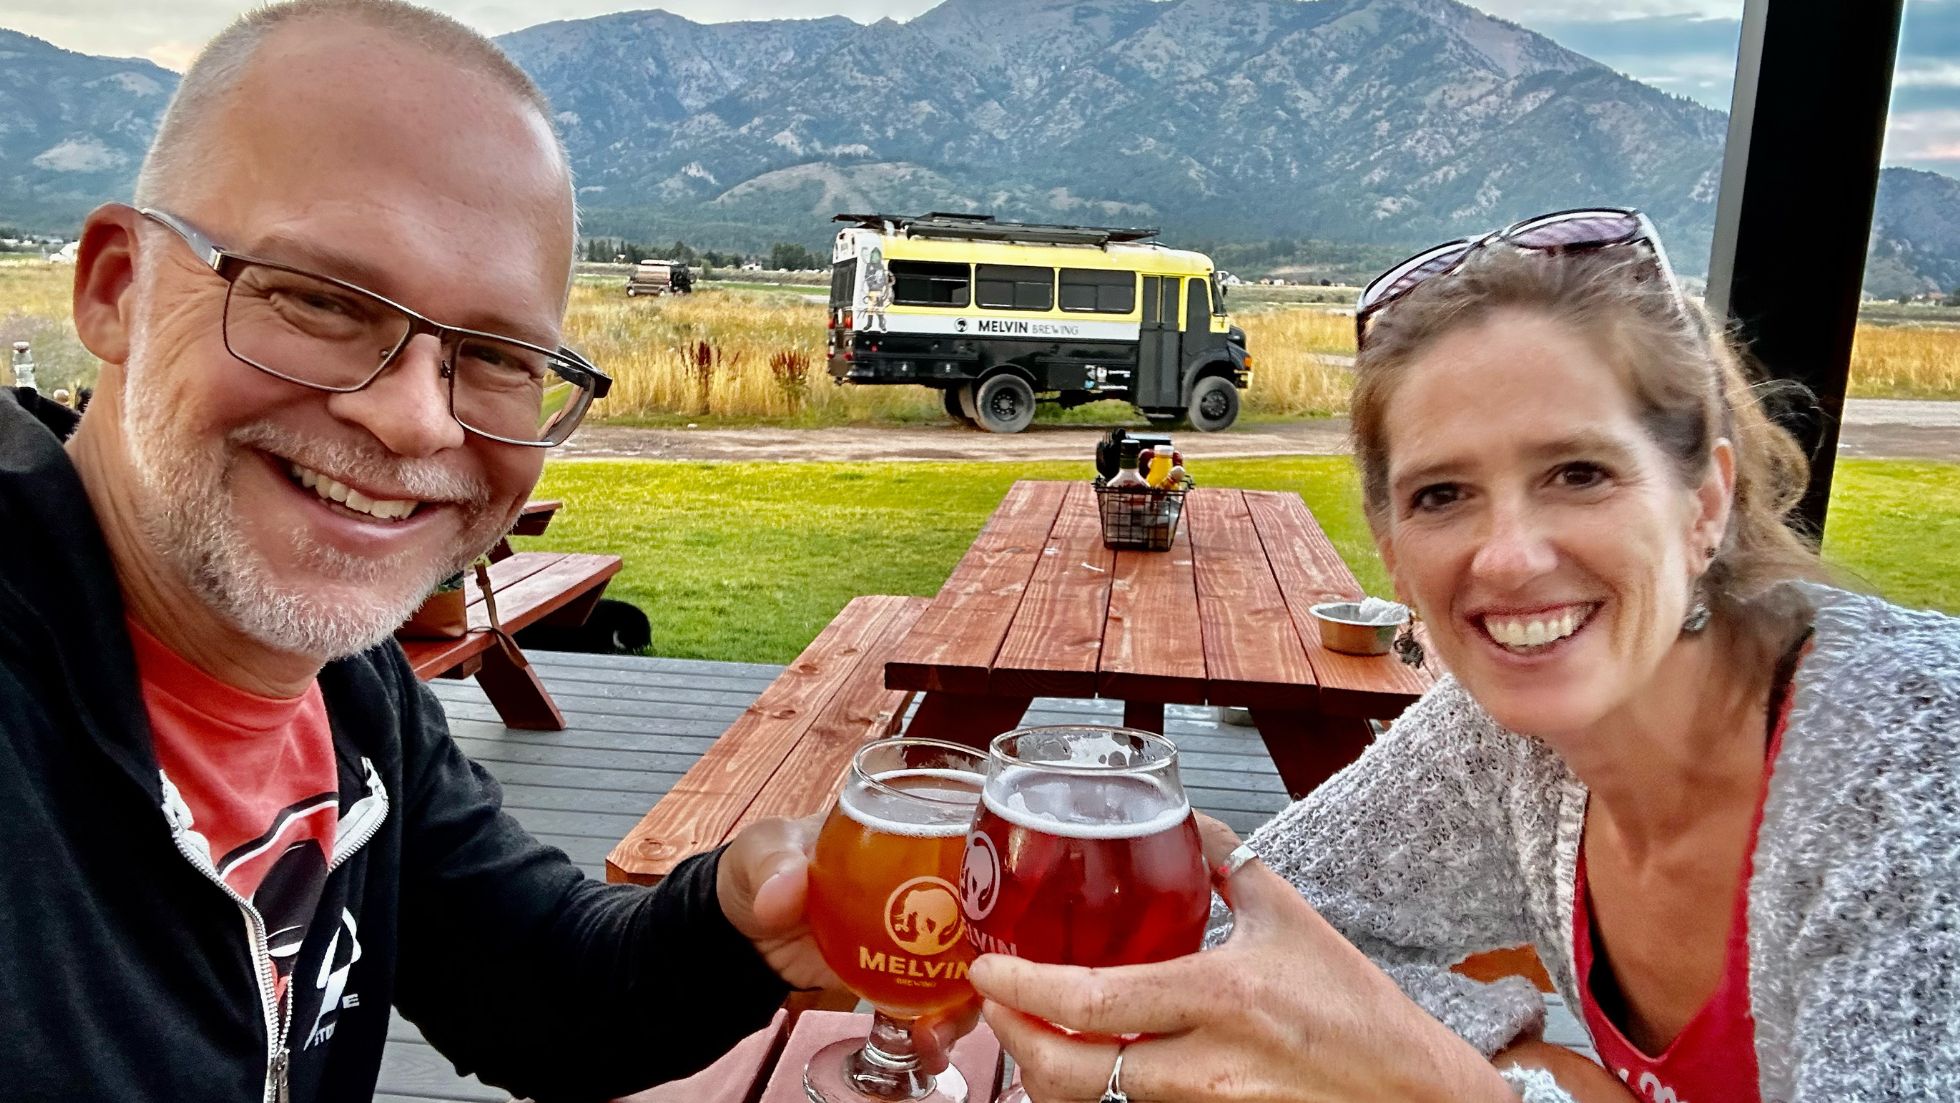 Melvin Brewing: The Perfect Pairing of Beer and Mother Nature